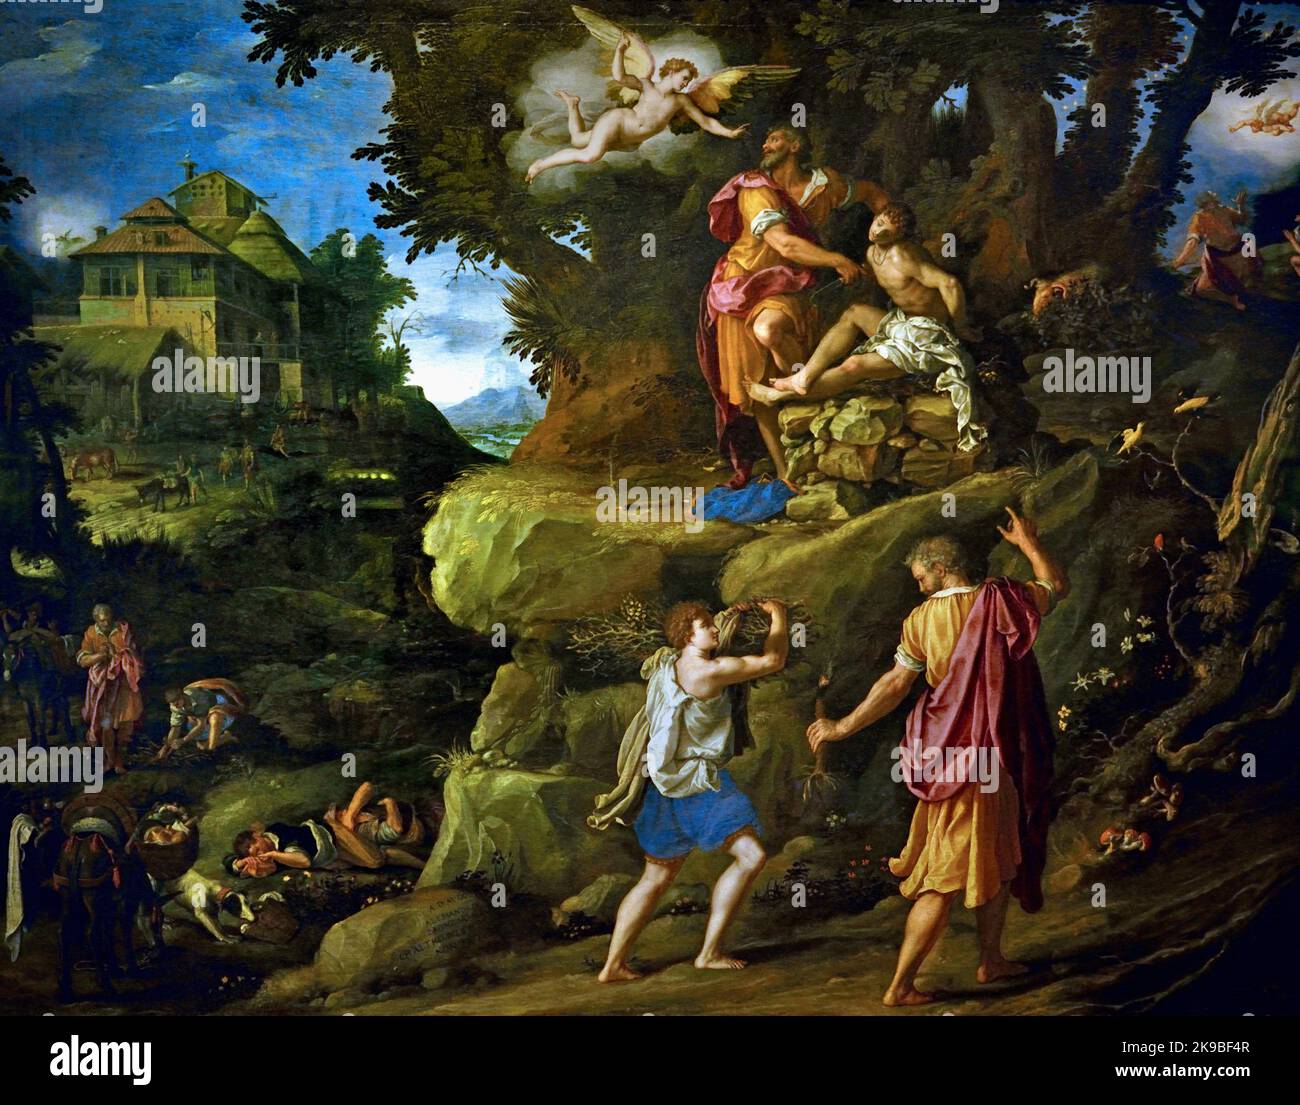 The Sacrifice of Isaac 1601 Alessandro Allori, (Florence 1535 – 1607) , Florence, Italy. God asks, Abraham , sacrifice his son Isaac , Mount Moriah, Abraham begins to comply, when a, messenger from God interrupts him, Abraham then sees a ram and sacrifices it instead, Stock Photo